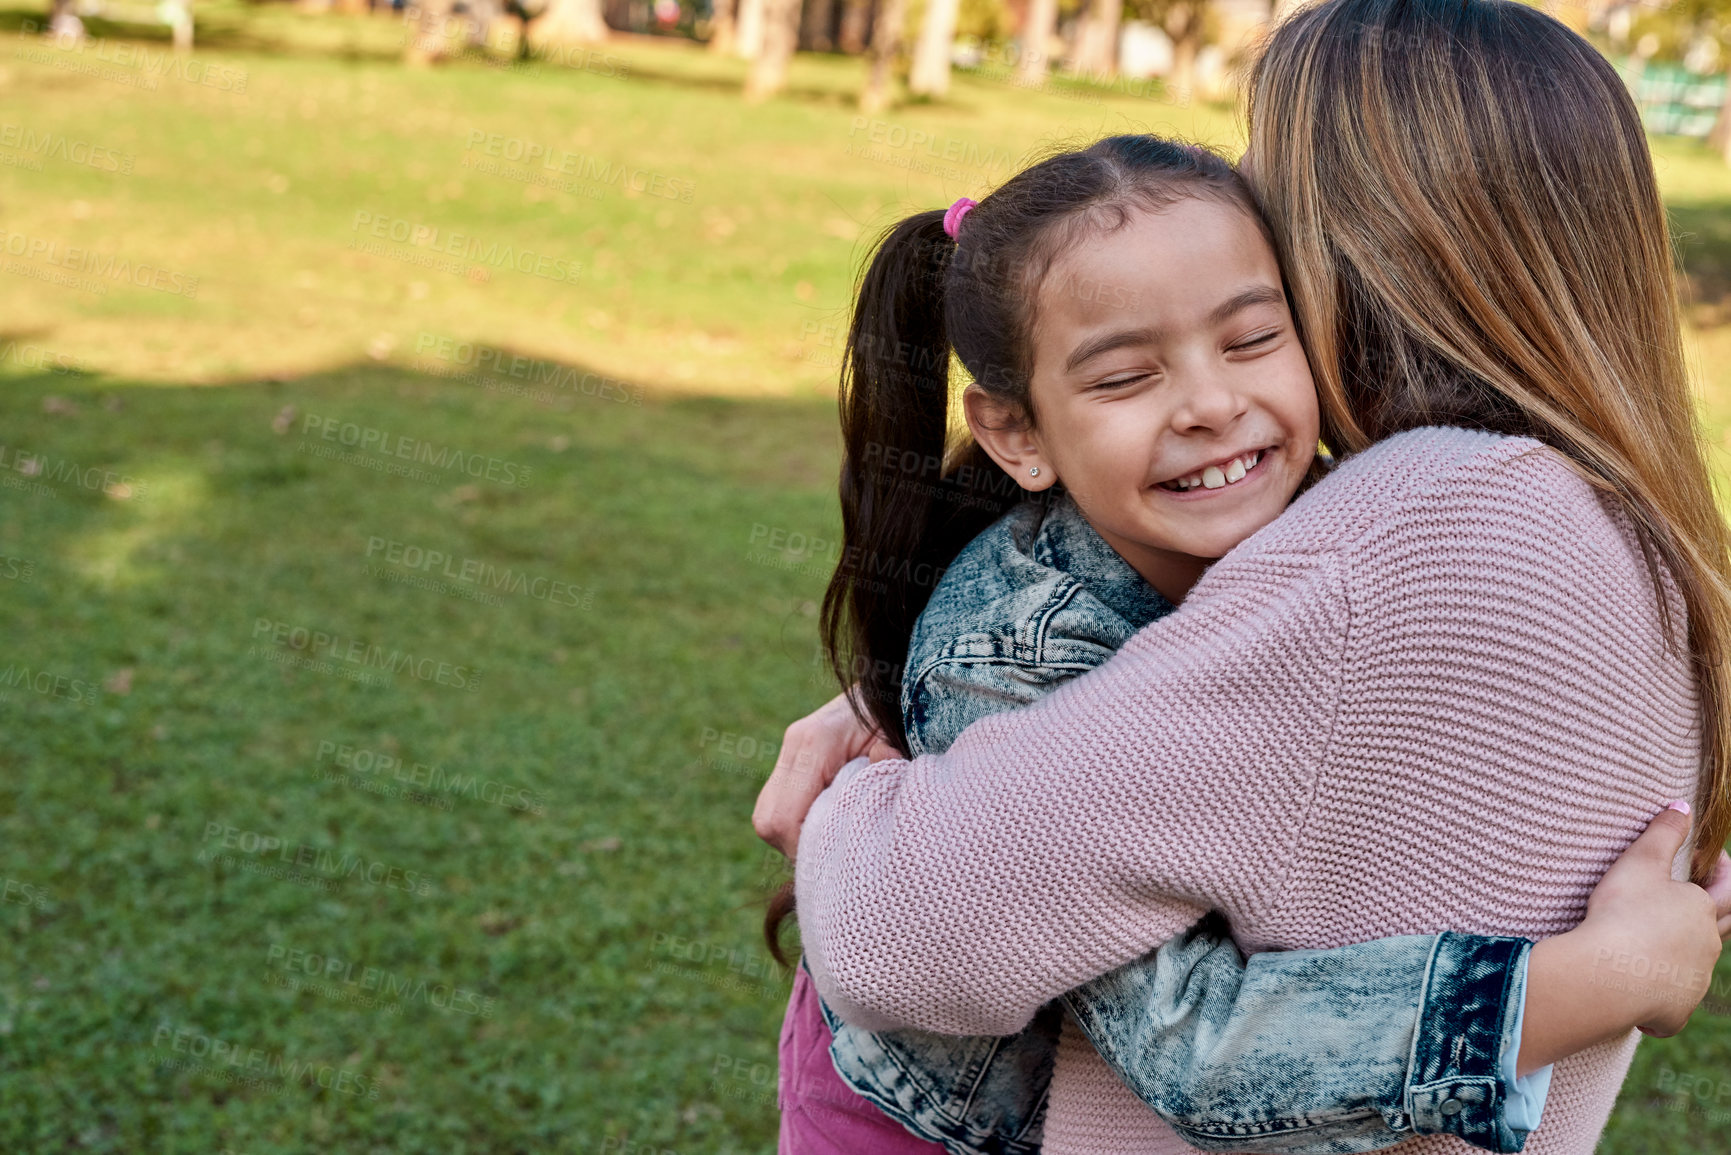 Buy stock photo Shot of an adorable little girl embracing her mother at the park